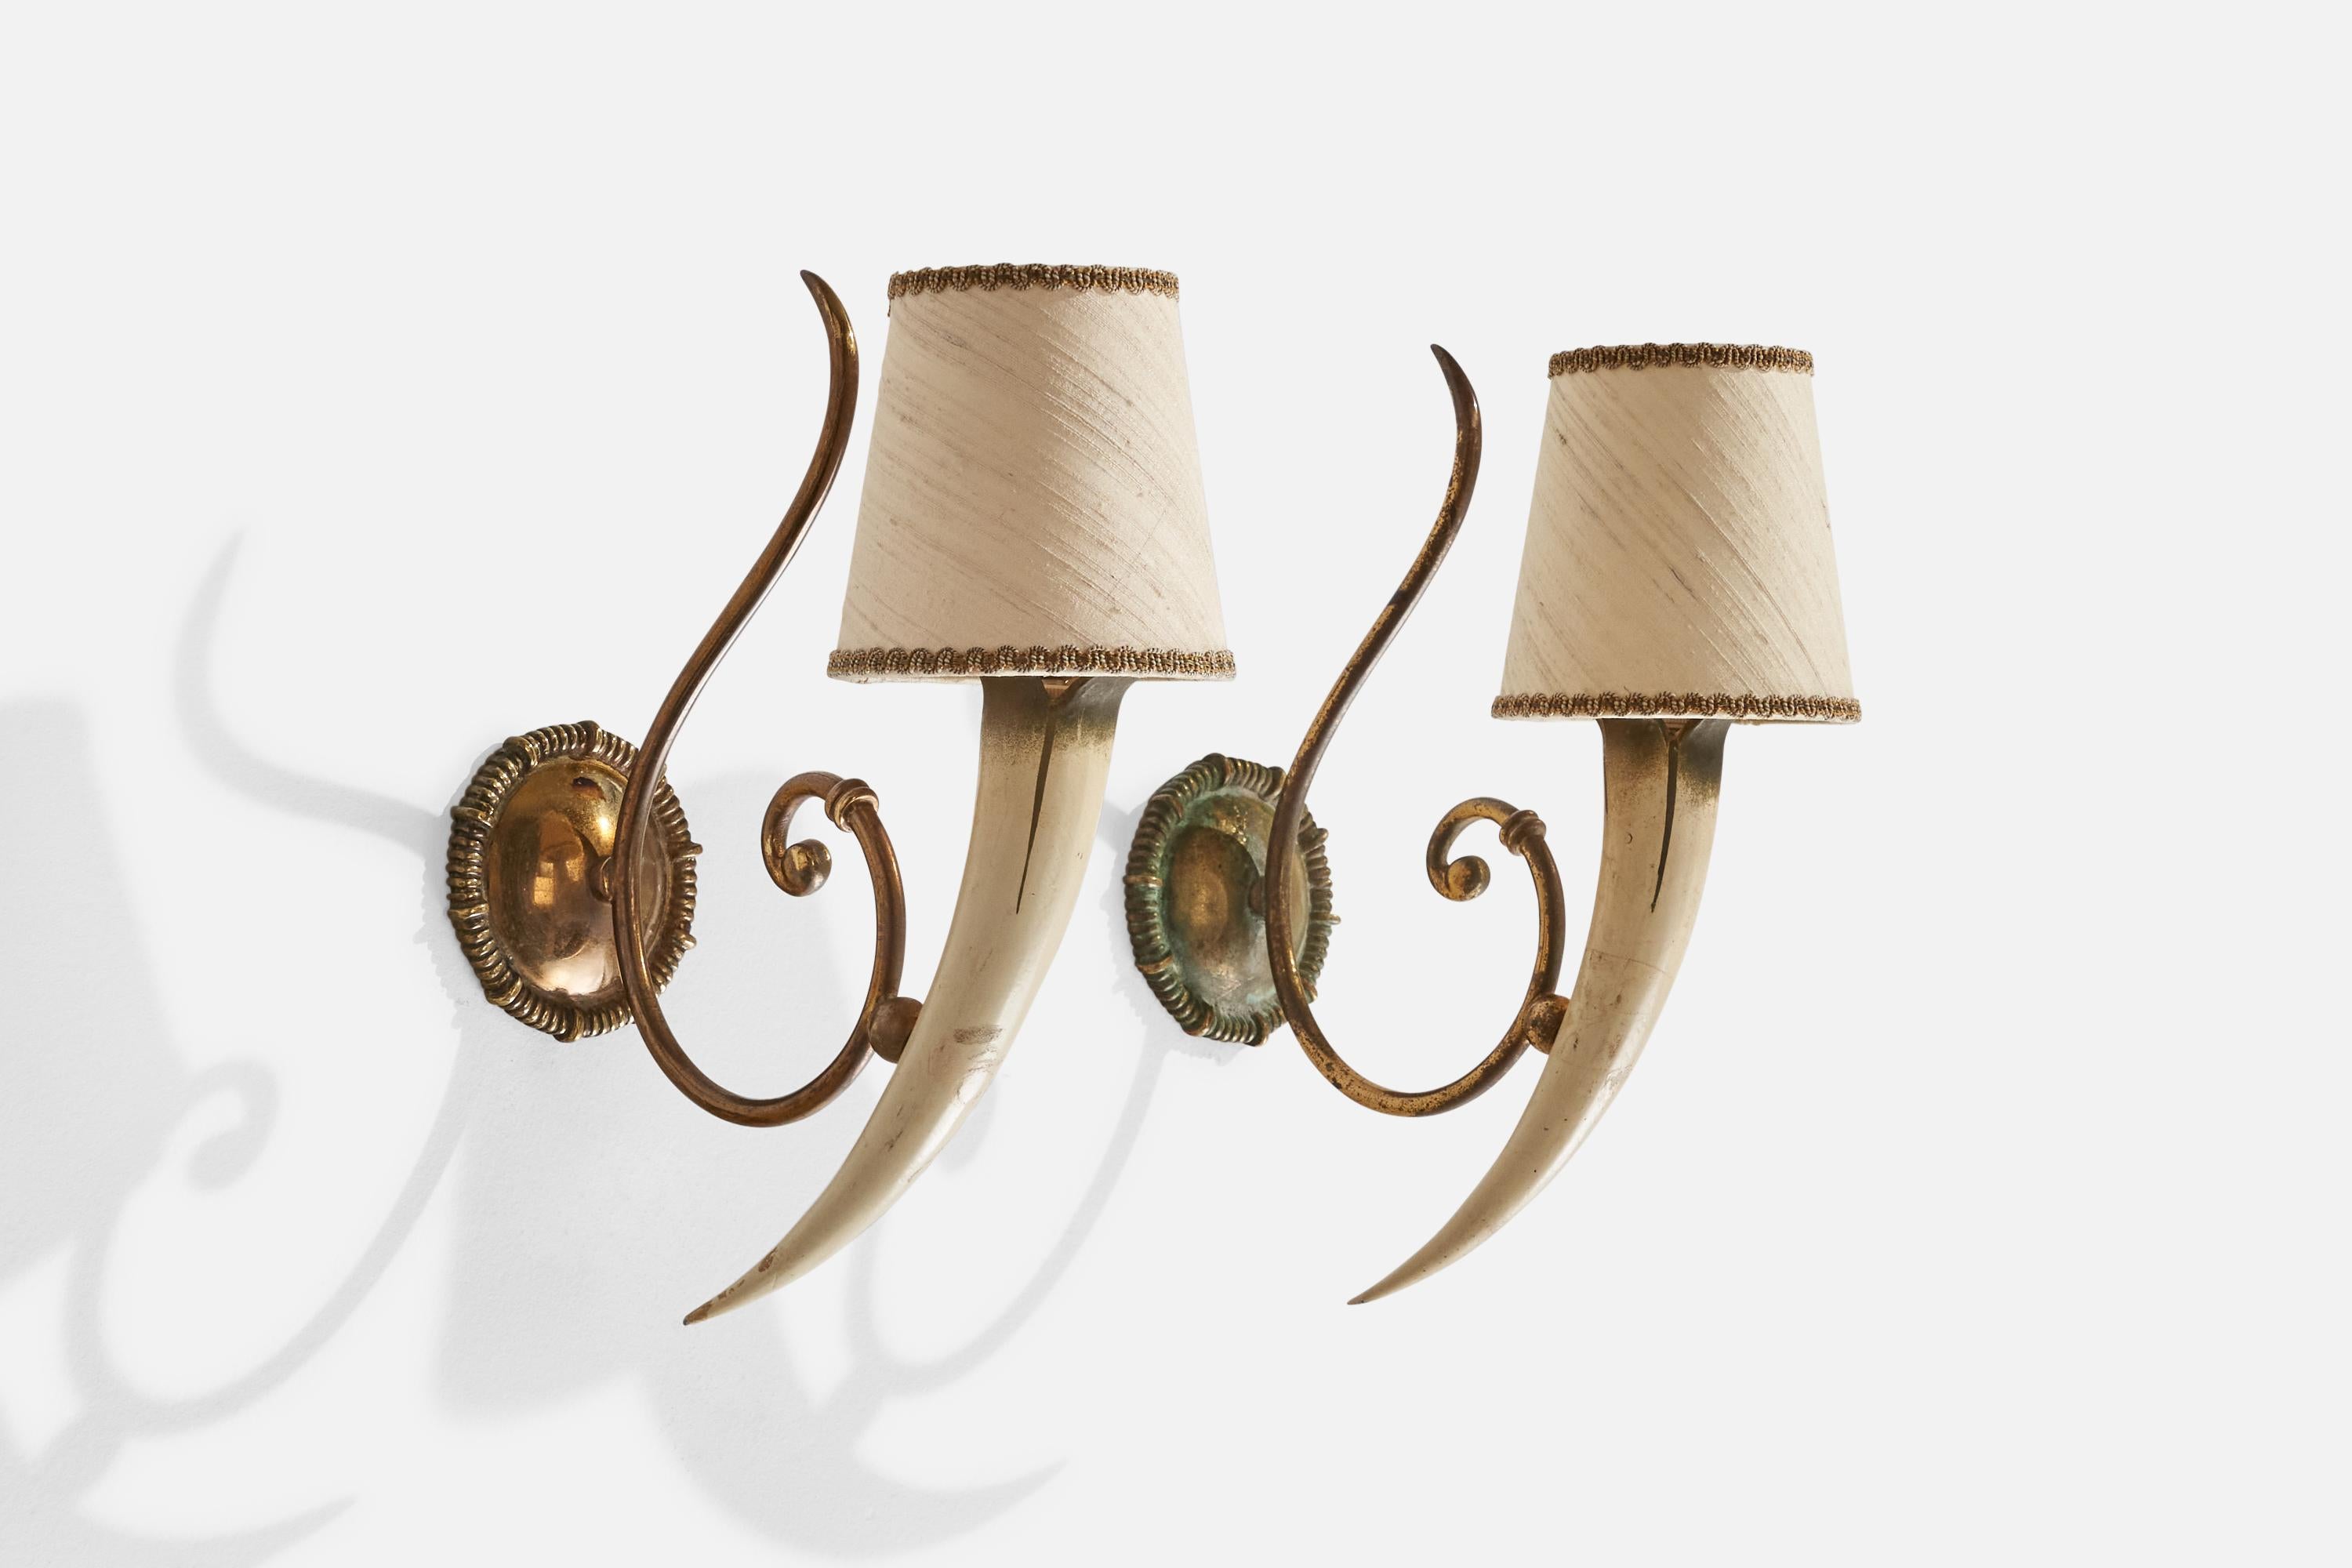 A pair of brass, painted resin and beige fabric lampshades designed and produced in Italy, 1940s.

Overall Dimensions (inches): 12” H x 4” W x 9.25” D
Back Plate Dimensions (inches): 3.5”  H x 3.5” W x .75” D
Bulb Specifications: E-14 Bulb
Number of